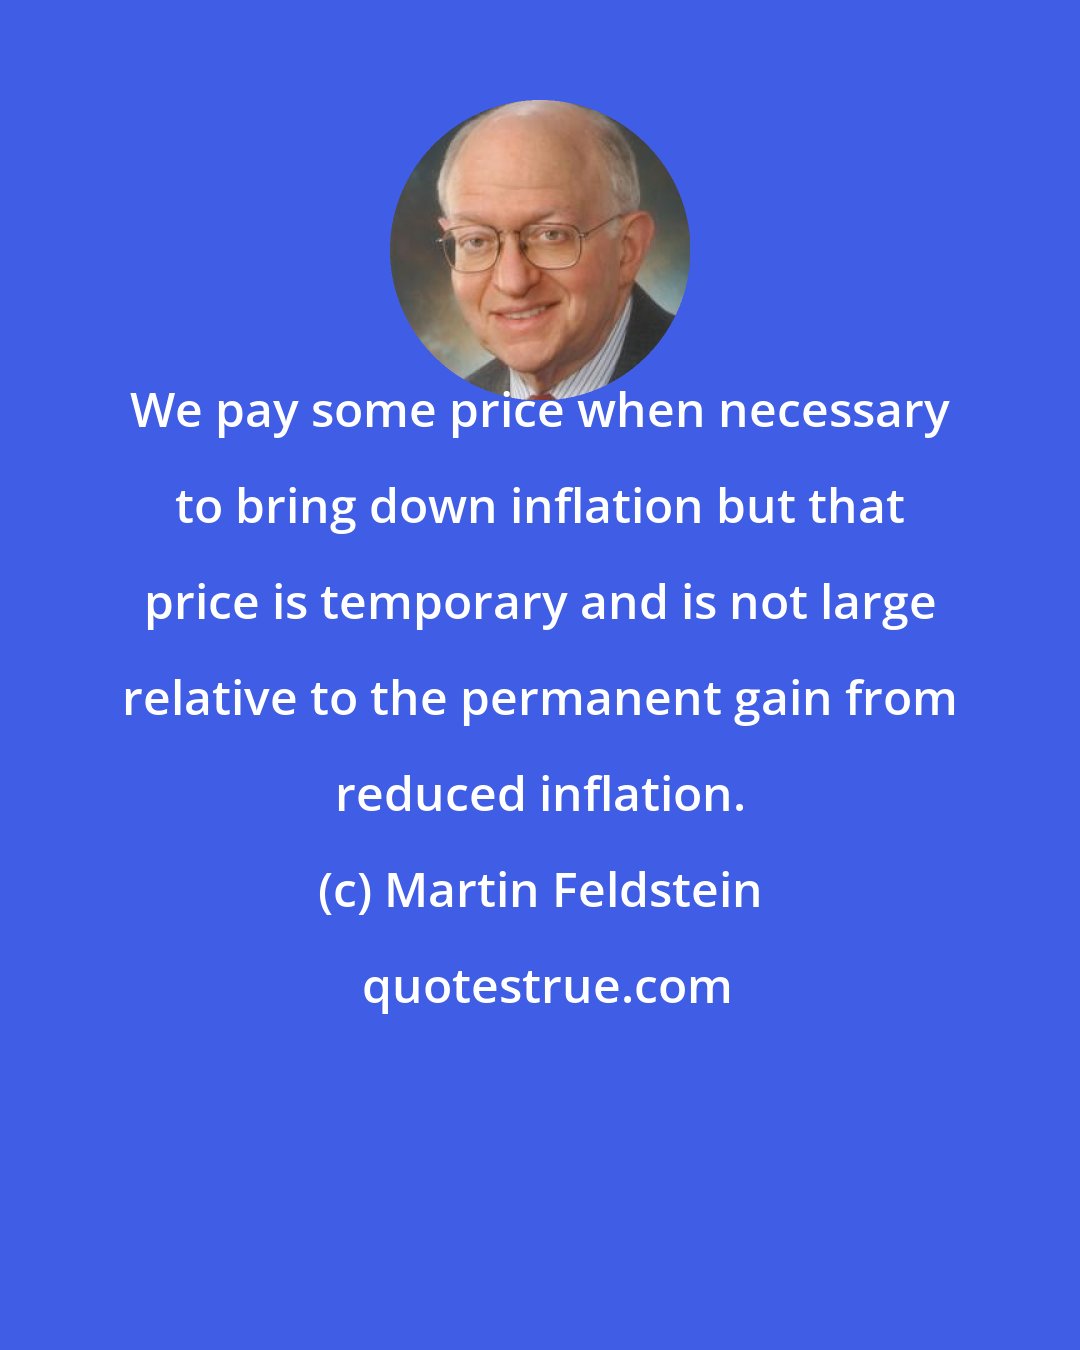 Martin Feldstein: We pay some price when necessary to bring down inflation but that price is temporary and is not large relative to the permanent gain from reduced inflation.